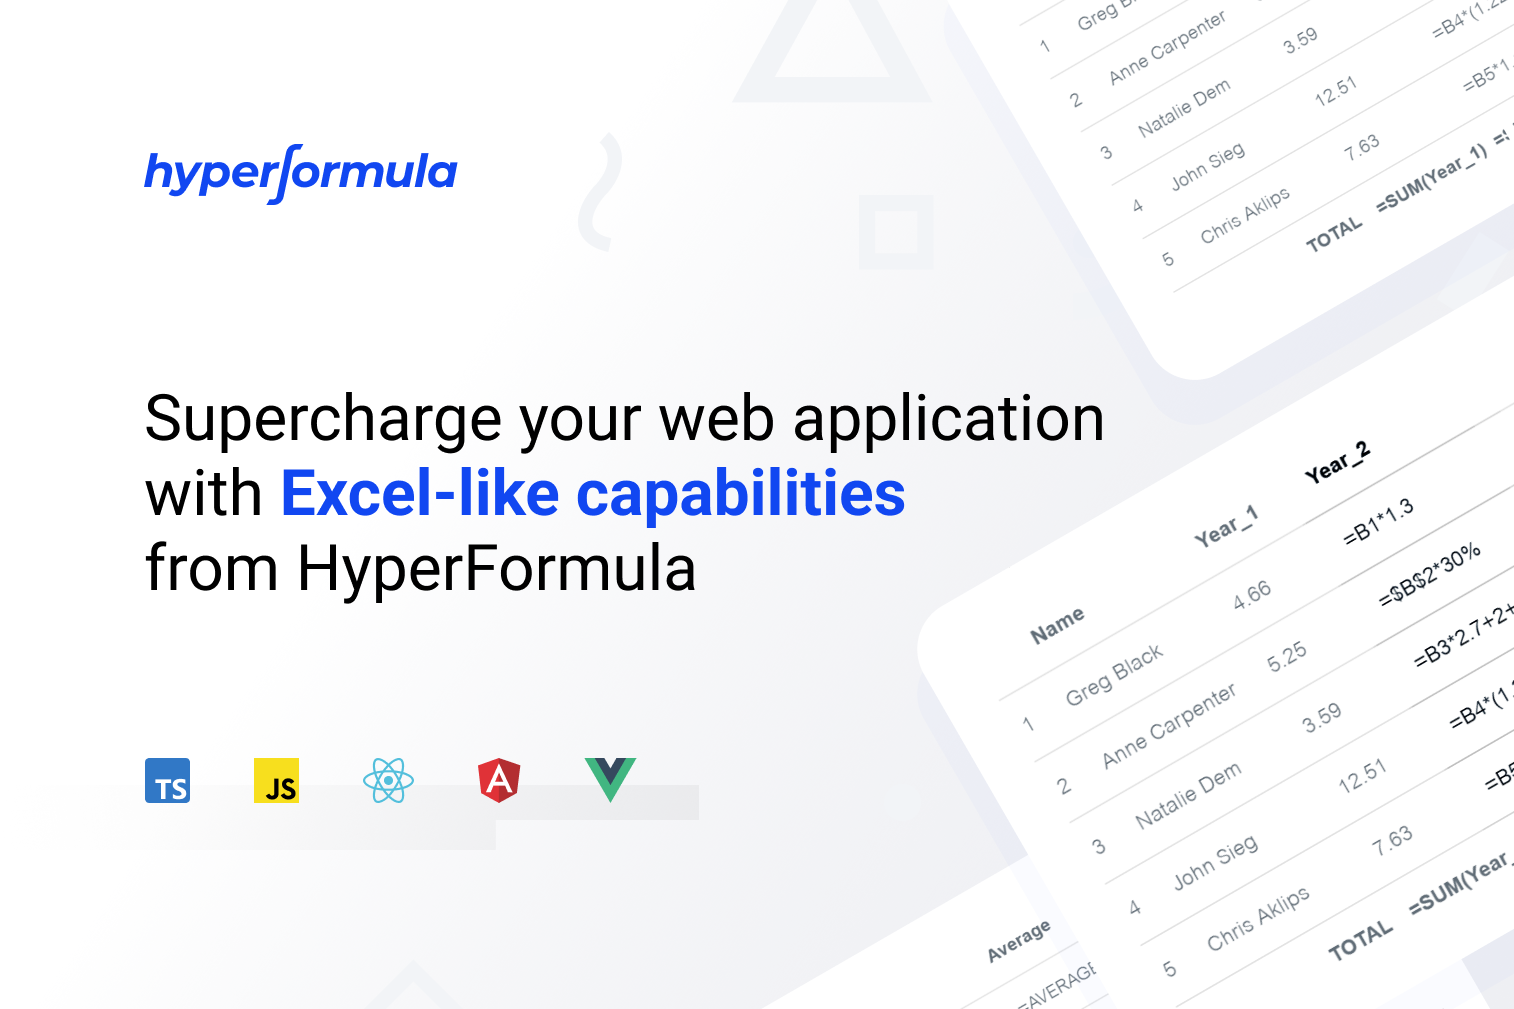 Illustration for the blog post - Supercharge your web application with Excel-like capabilities from HyperFormula